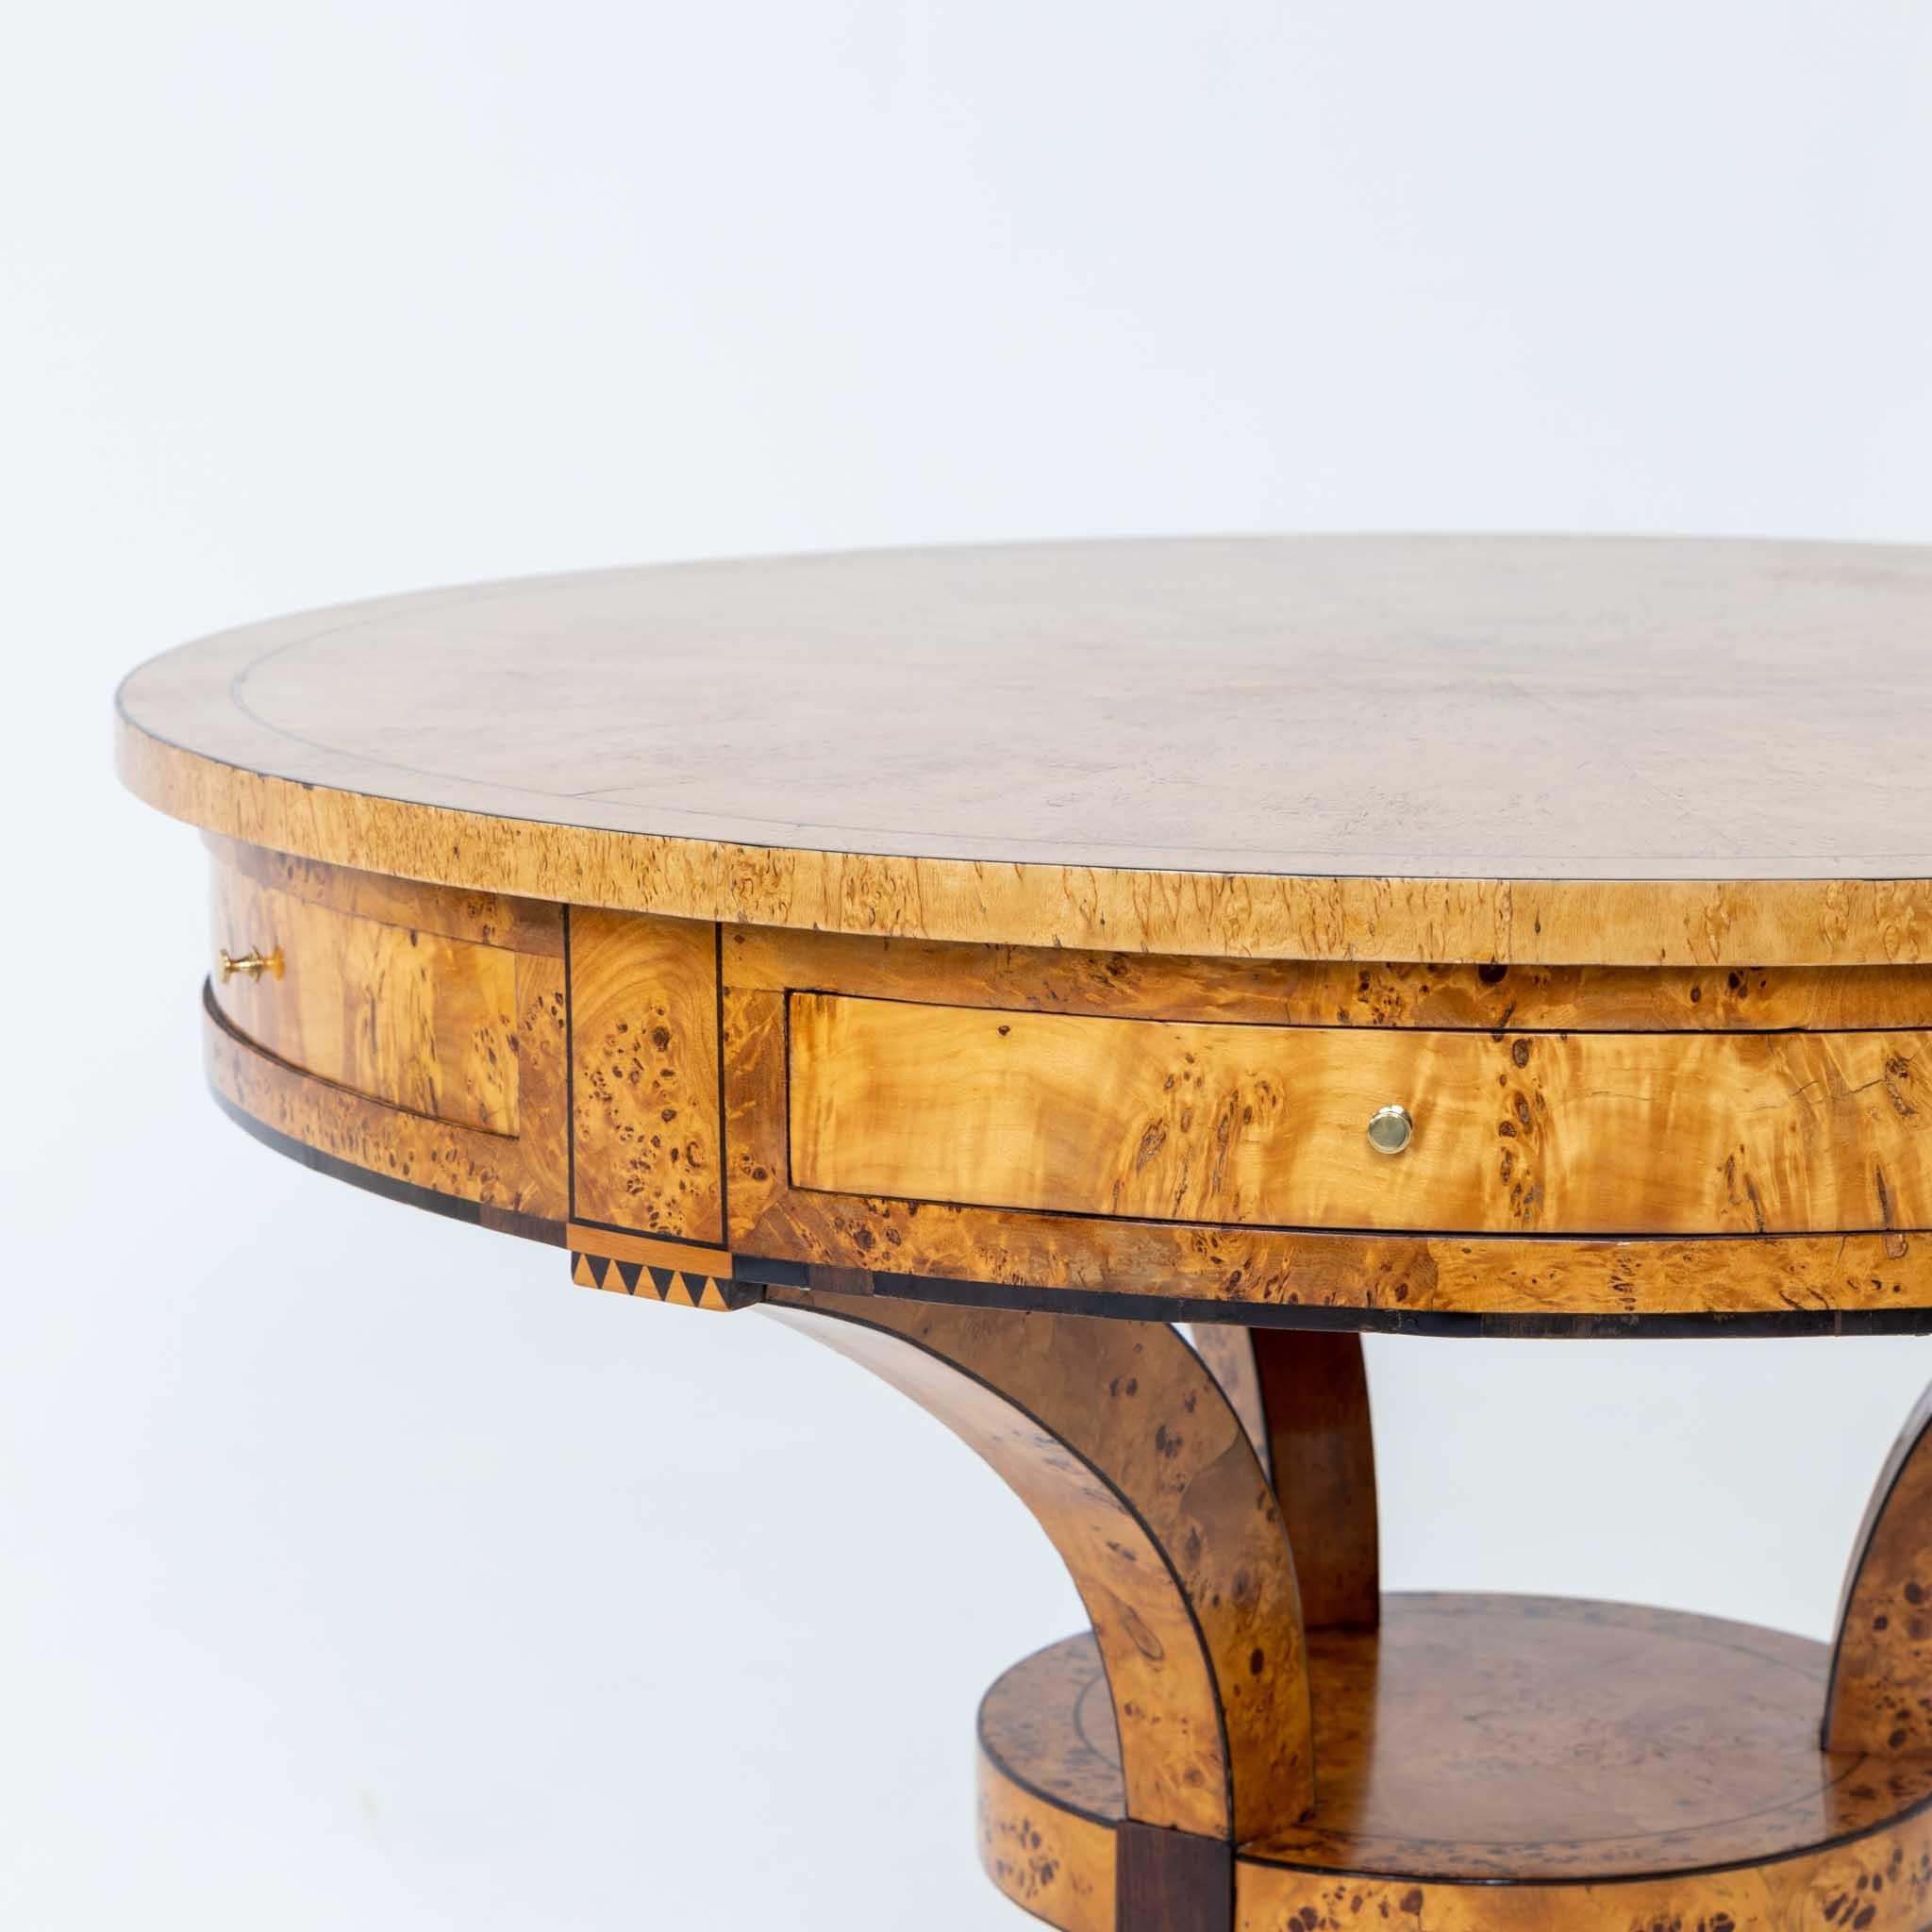 Biedermeier Game Table in Birch, Baltic States, early 19th Century For Sale 2